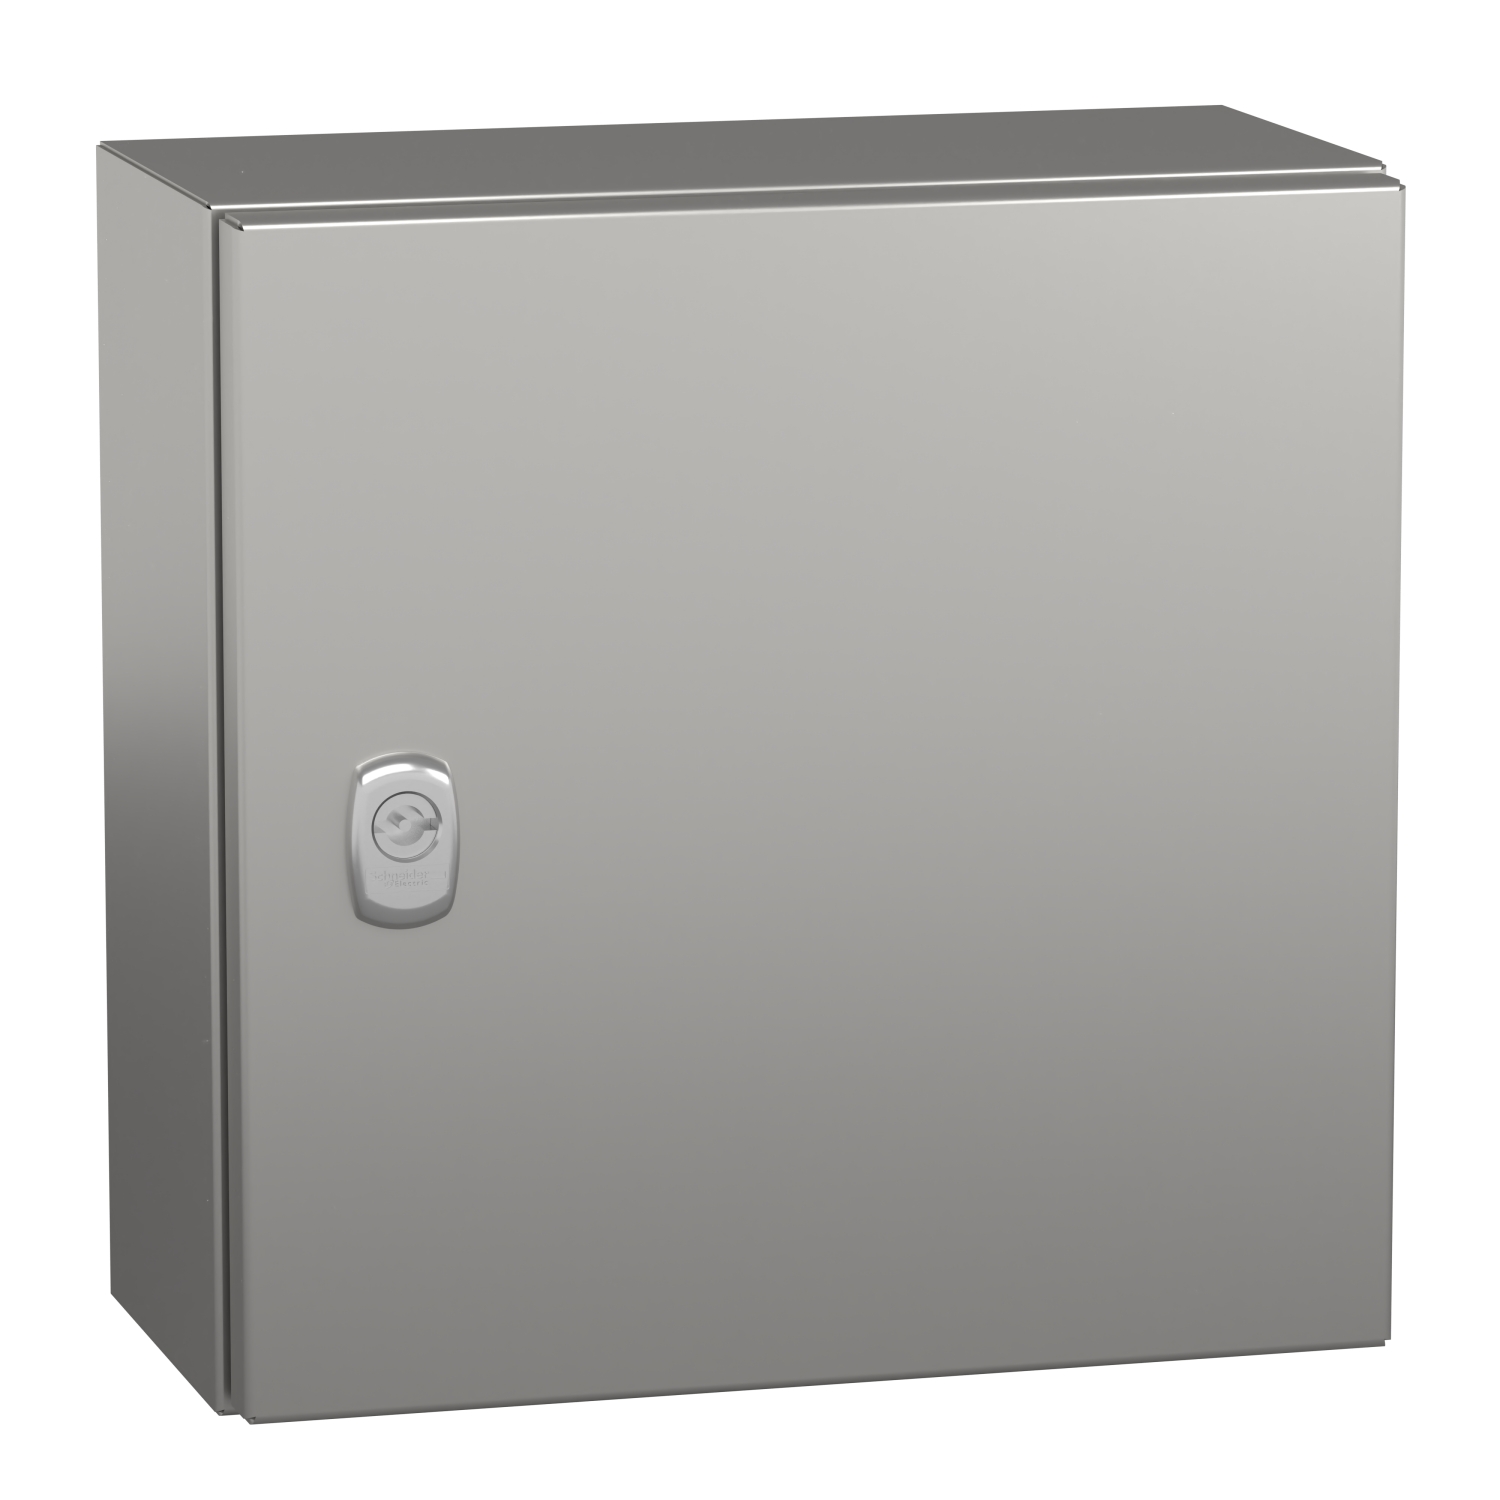 Wall mounted enclosure, Spacial S3X, stainless steel 304L, plain door, 300x300x150mm, IP66